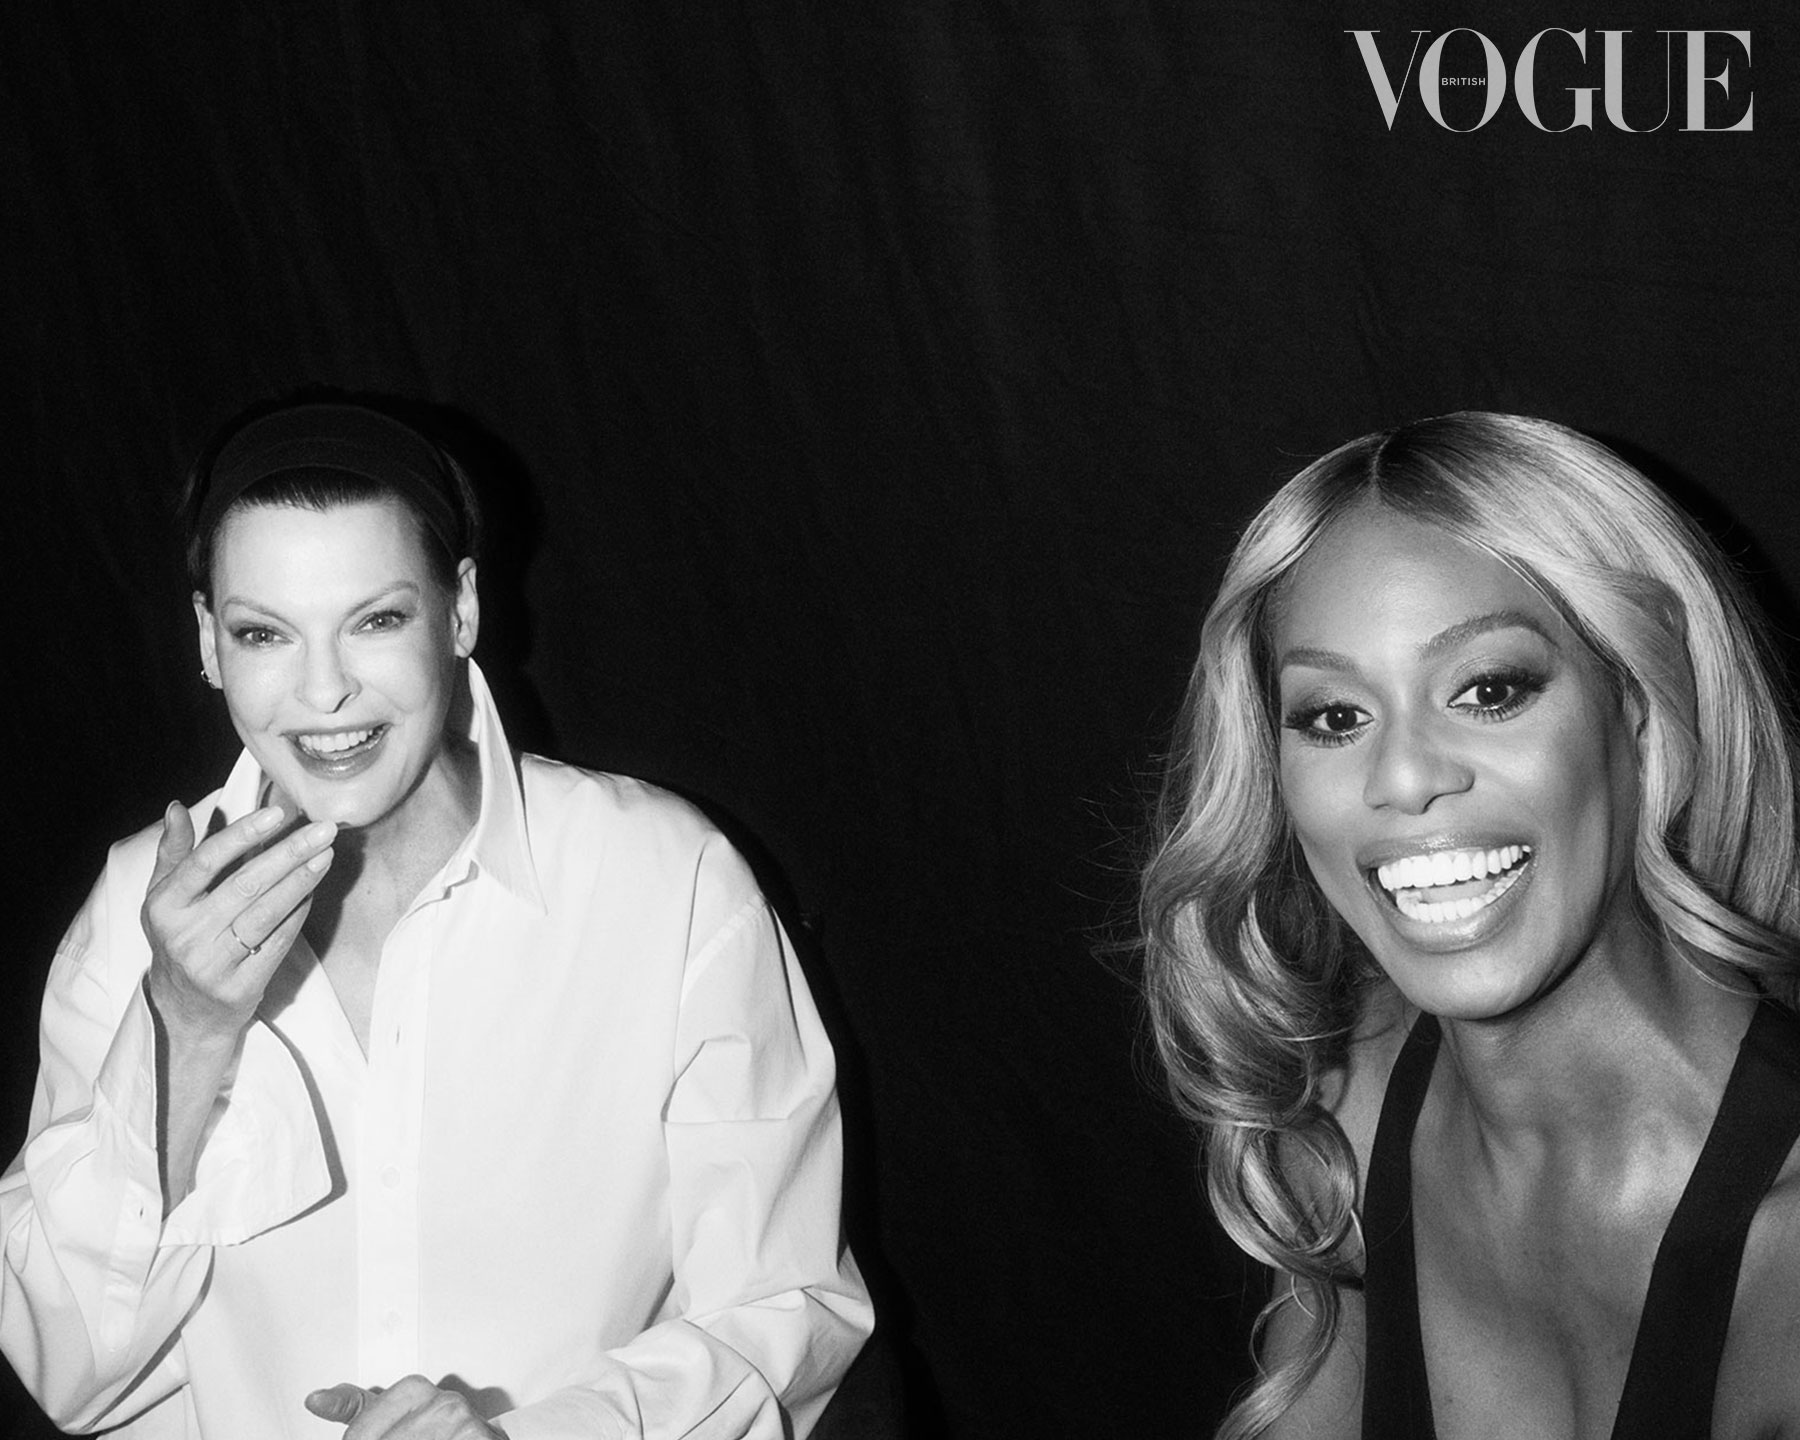 A black and white image, shows Linda Evangelista, a white woman, on the left, wearing a white shirt, with a black headband holding her short hair back. She is visible from the waist up, smiling and pointing towards the camera with her right hand. On the right is Laverne Cox, a Black transgender woman, who is smiling broadly at something off camera.